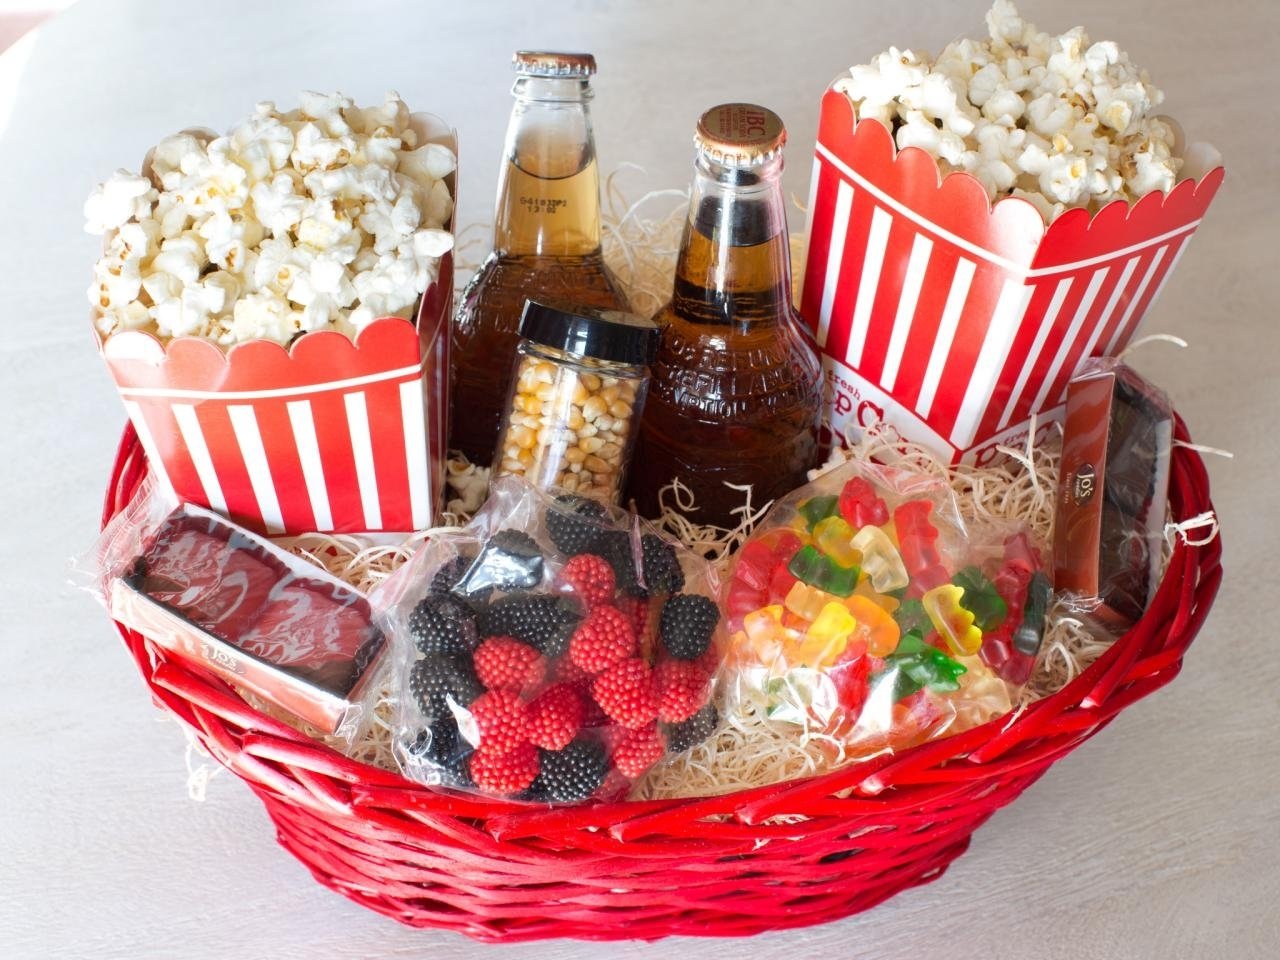 22 Of the Best Ideas for Easy Gift Baskets Ideas Home, Family, Style